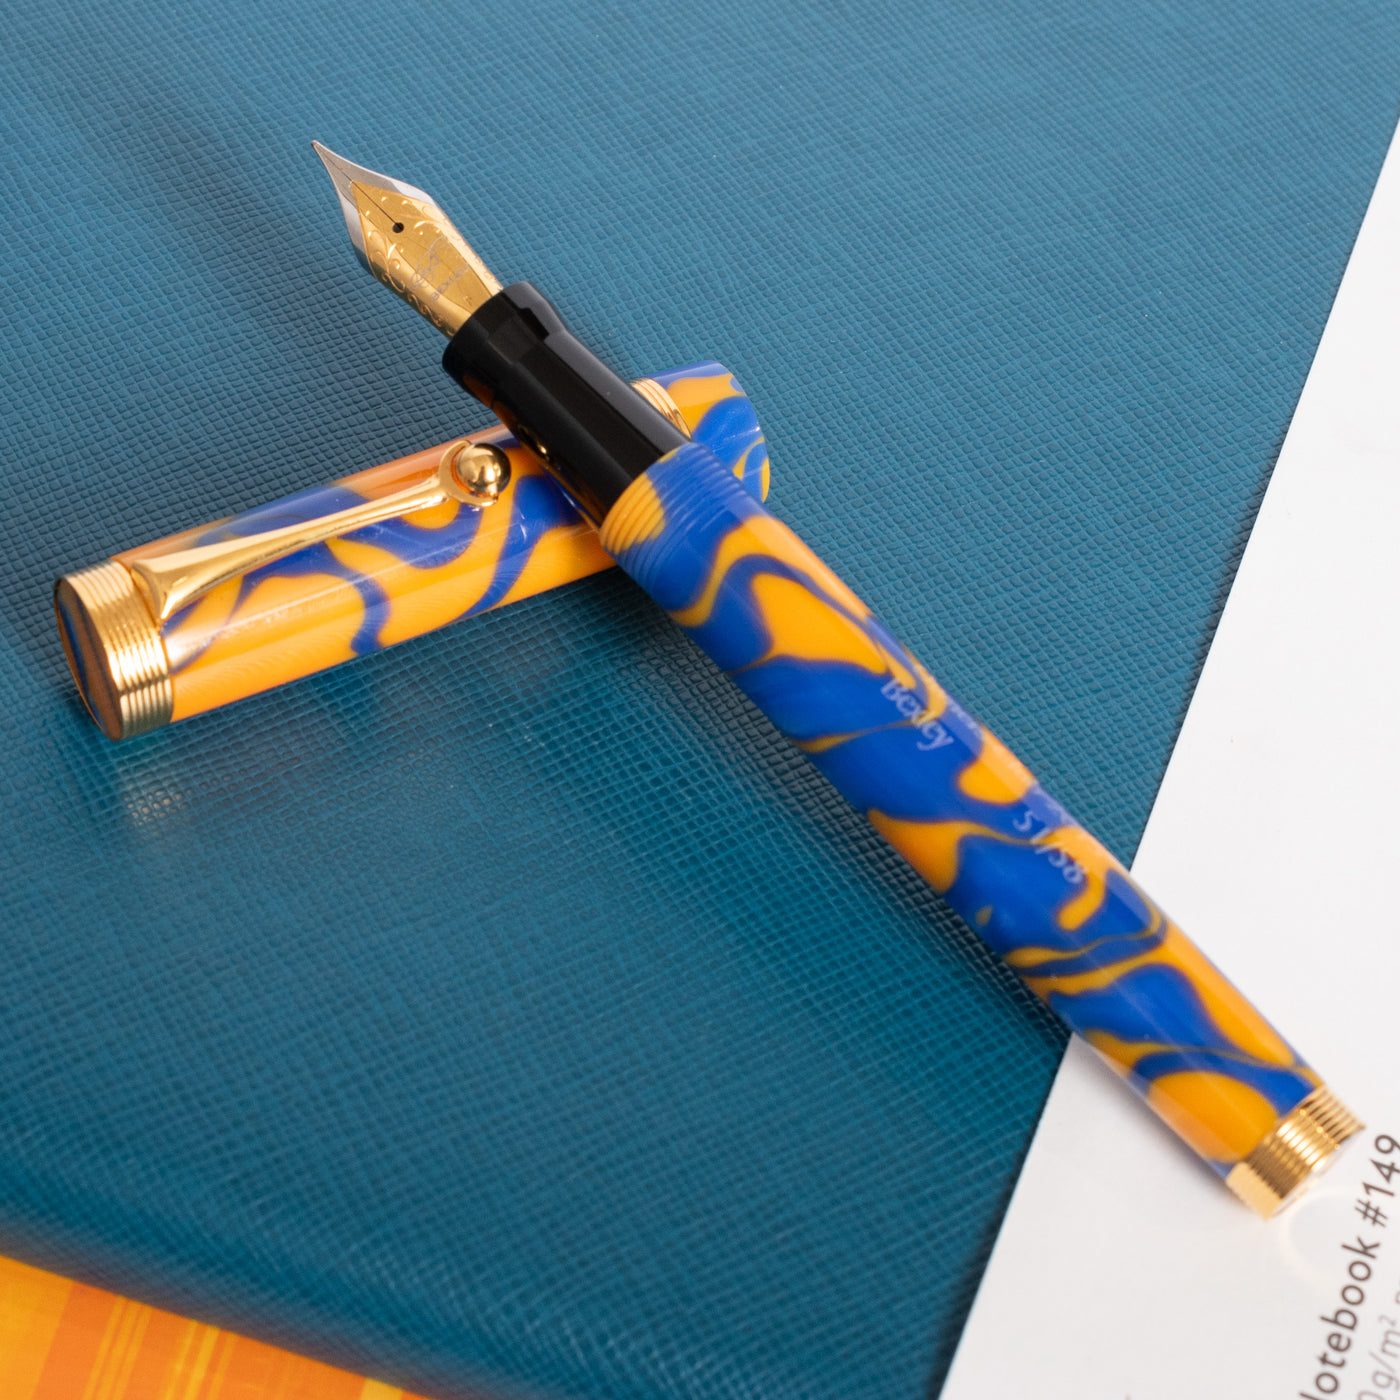 Bexley Owners Club 2015 Fountain Pen preowned